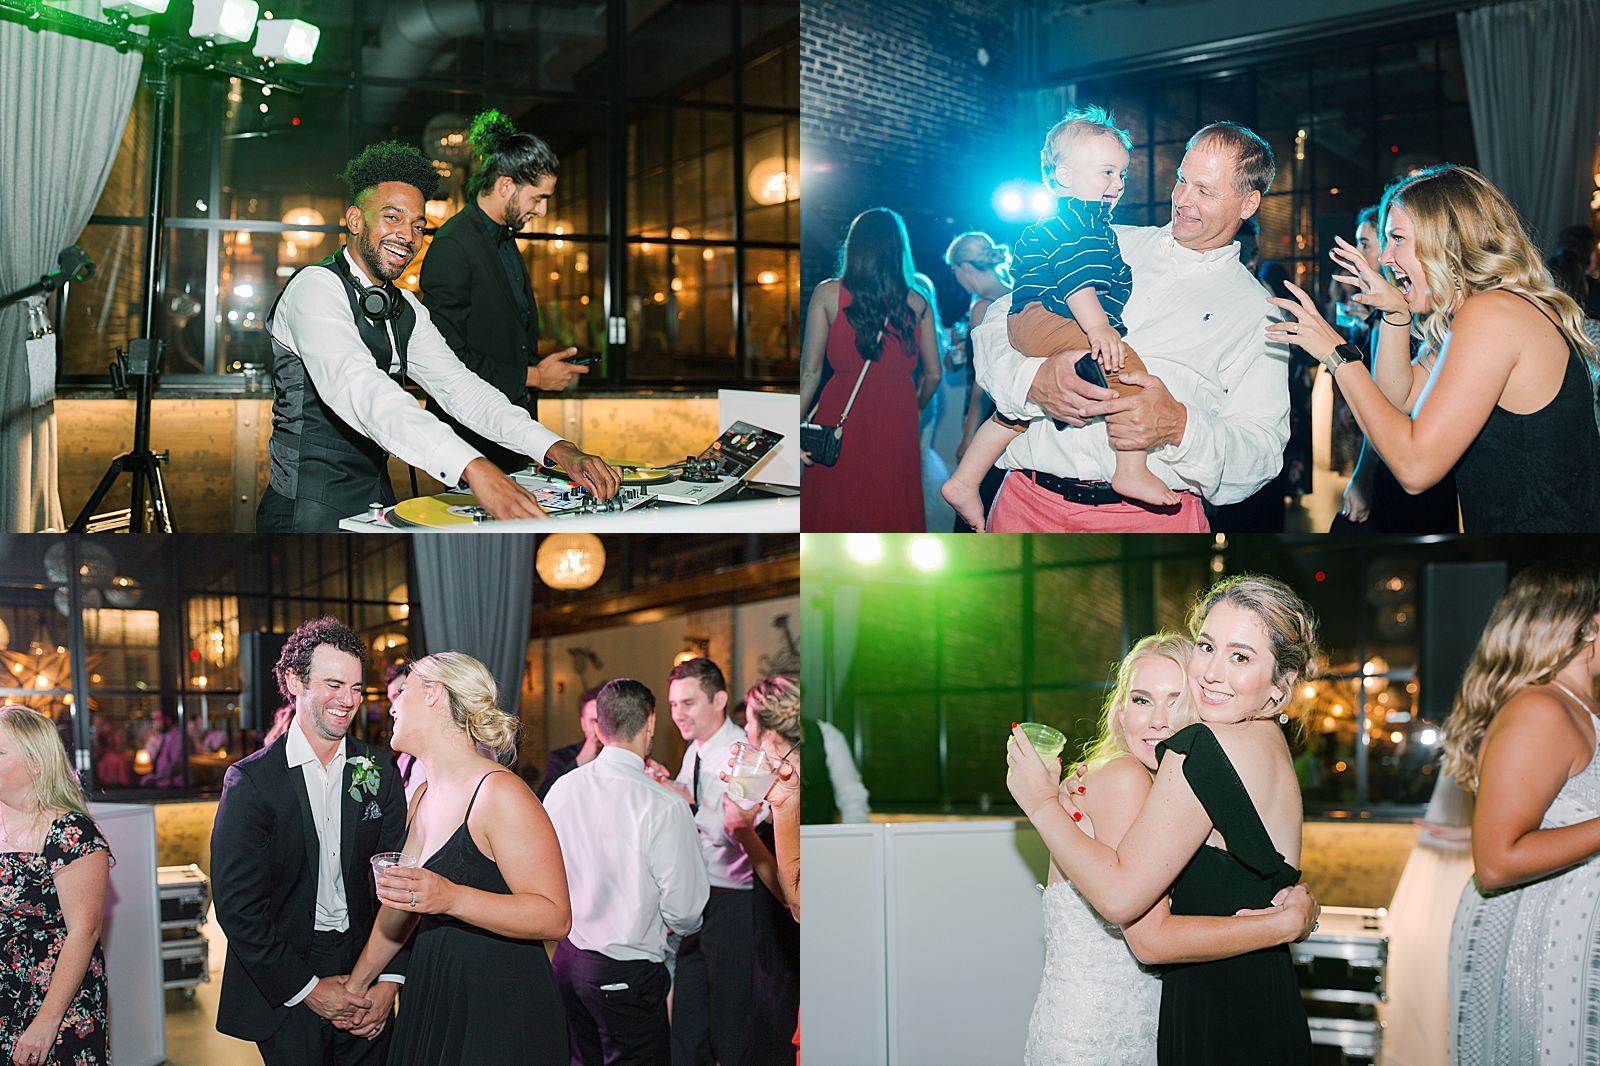 Glover Park Brewery Wedding Reception Guests Dancing and Partying Photos